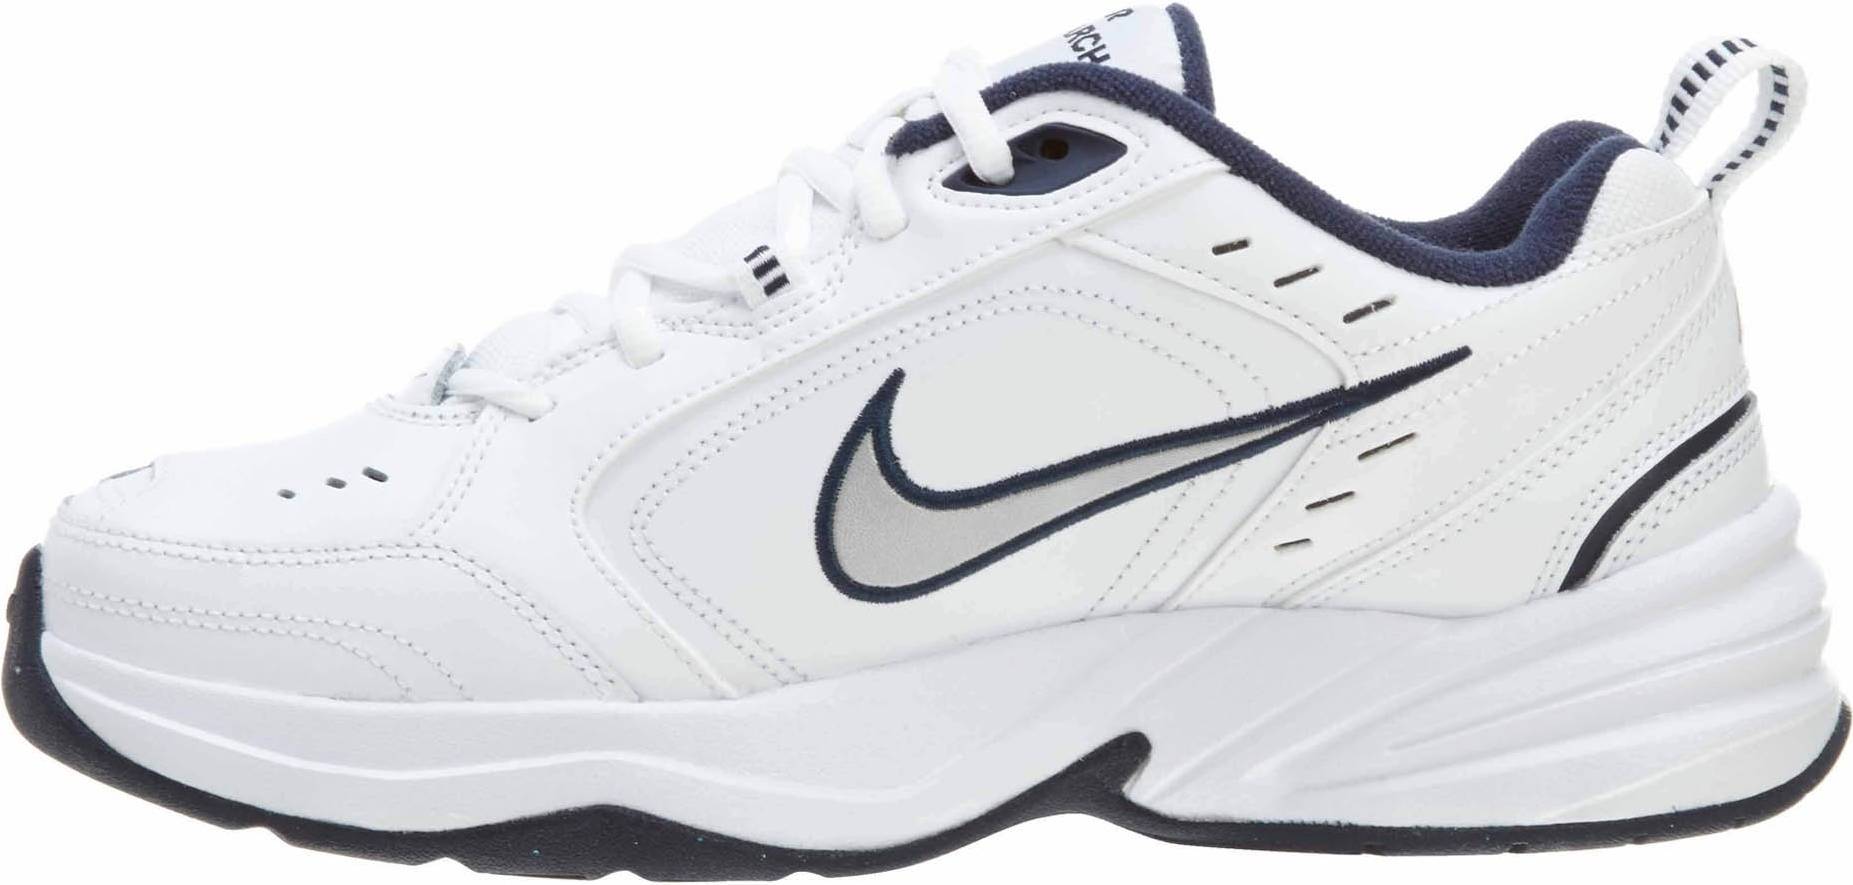 Addiction Abbreviate property Nike Air Monarch IV sneakers in 7 colors (only $45) | RunRepeat